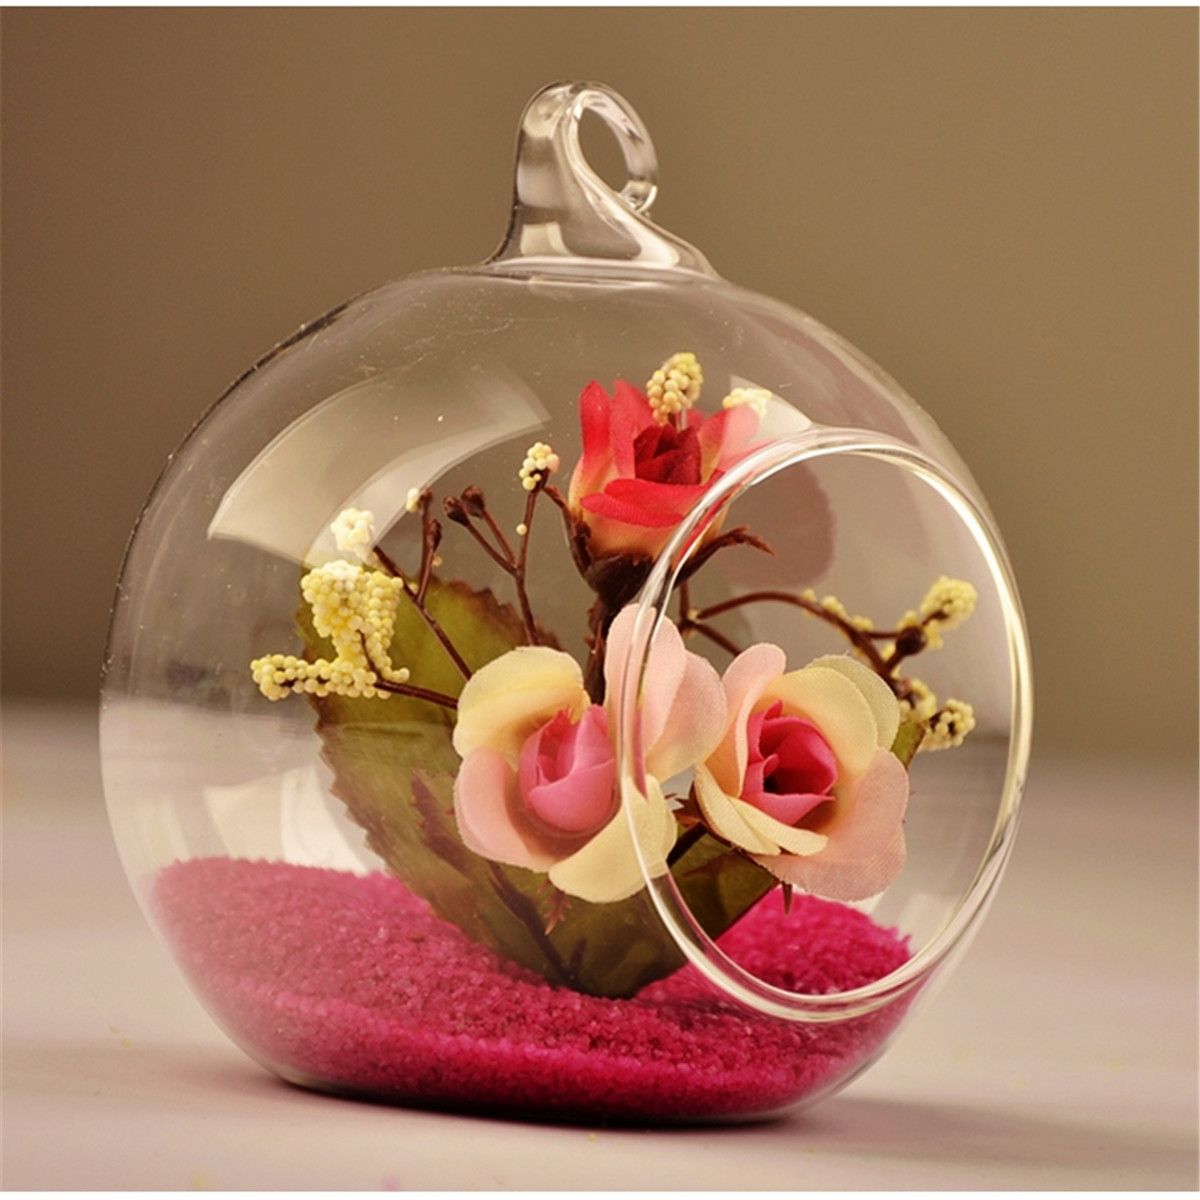 Hanging-Glass-Iron-Ball-Flower-Vase-Micro-Landscape-Terrarium-with-S-Support-Stand-1332931